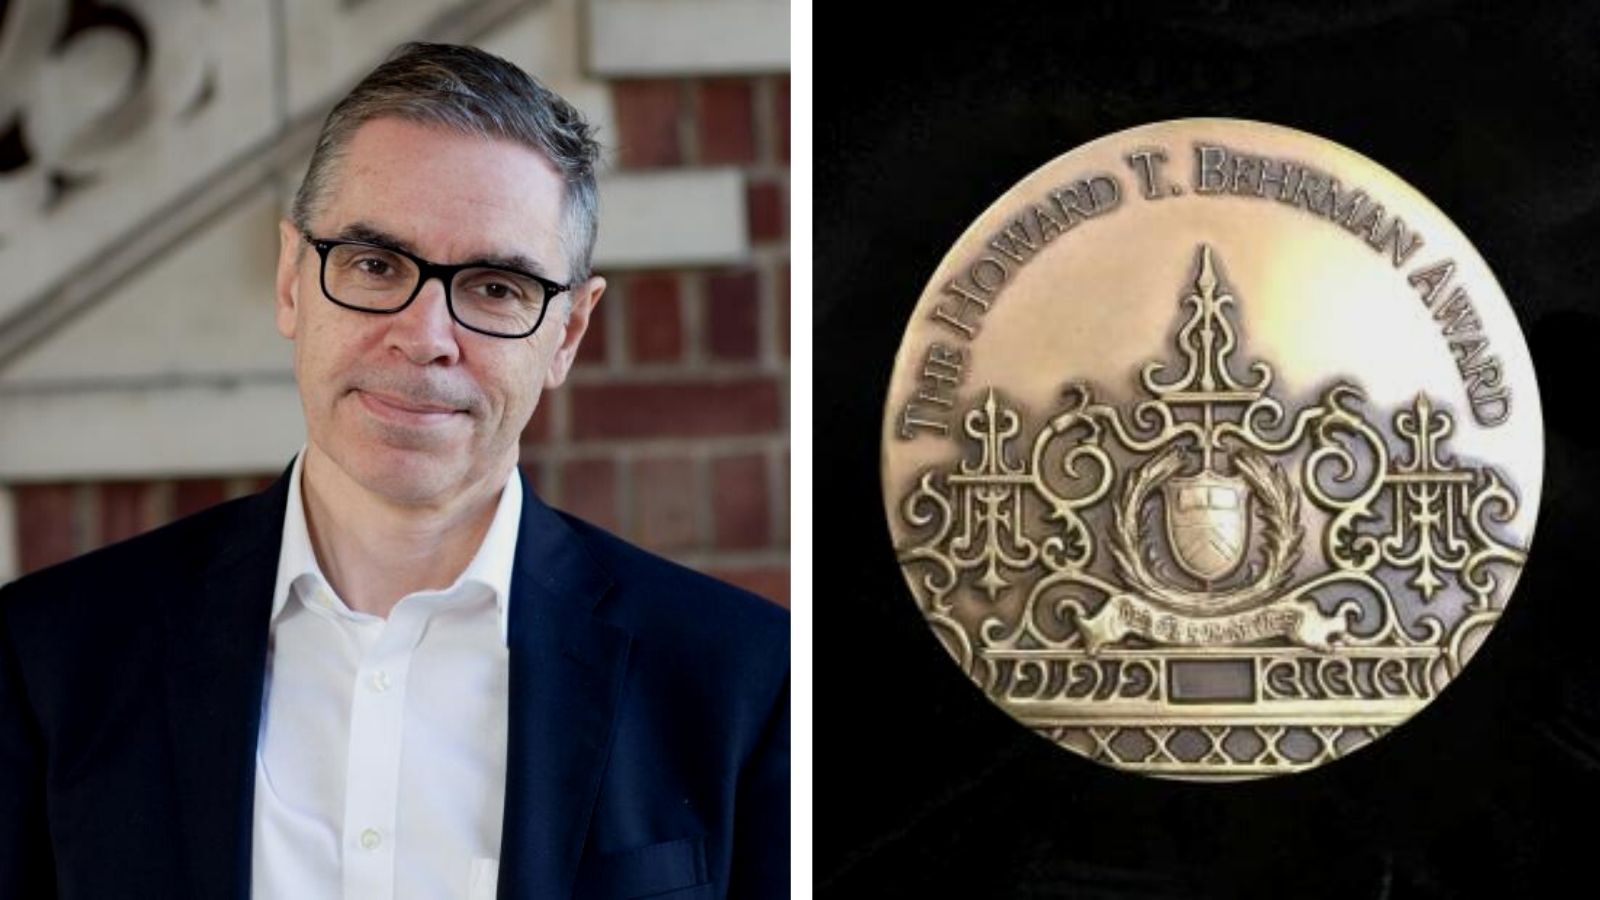 Director of Canadian Studies Receives Behrman Award for Achievement in the Humanities